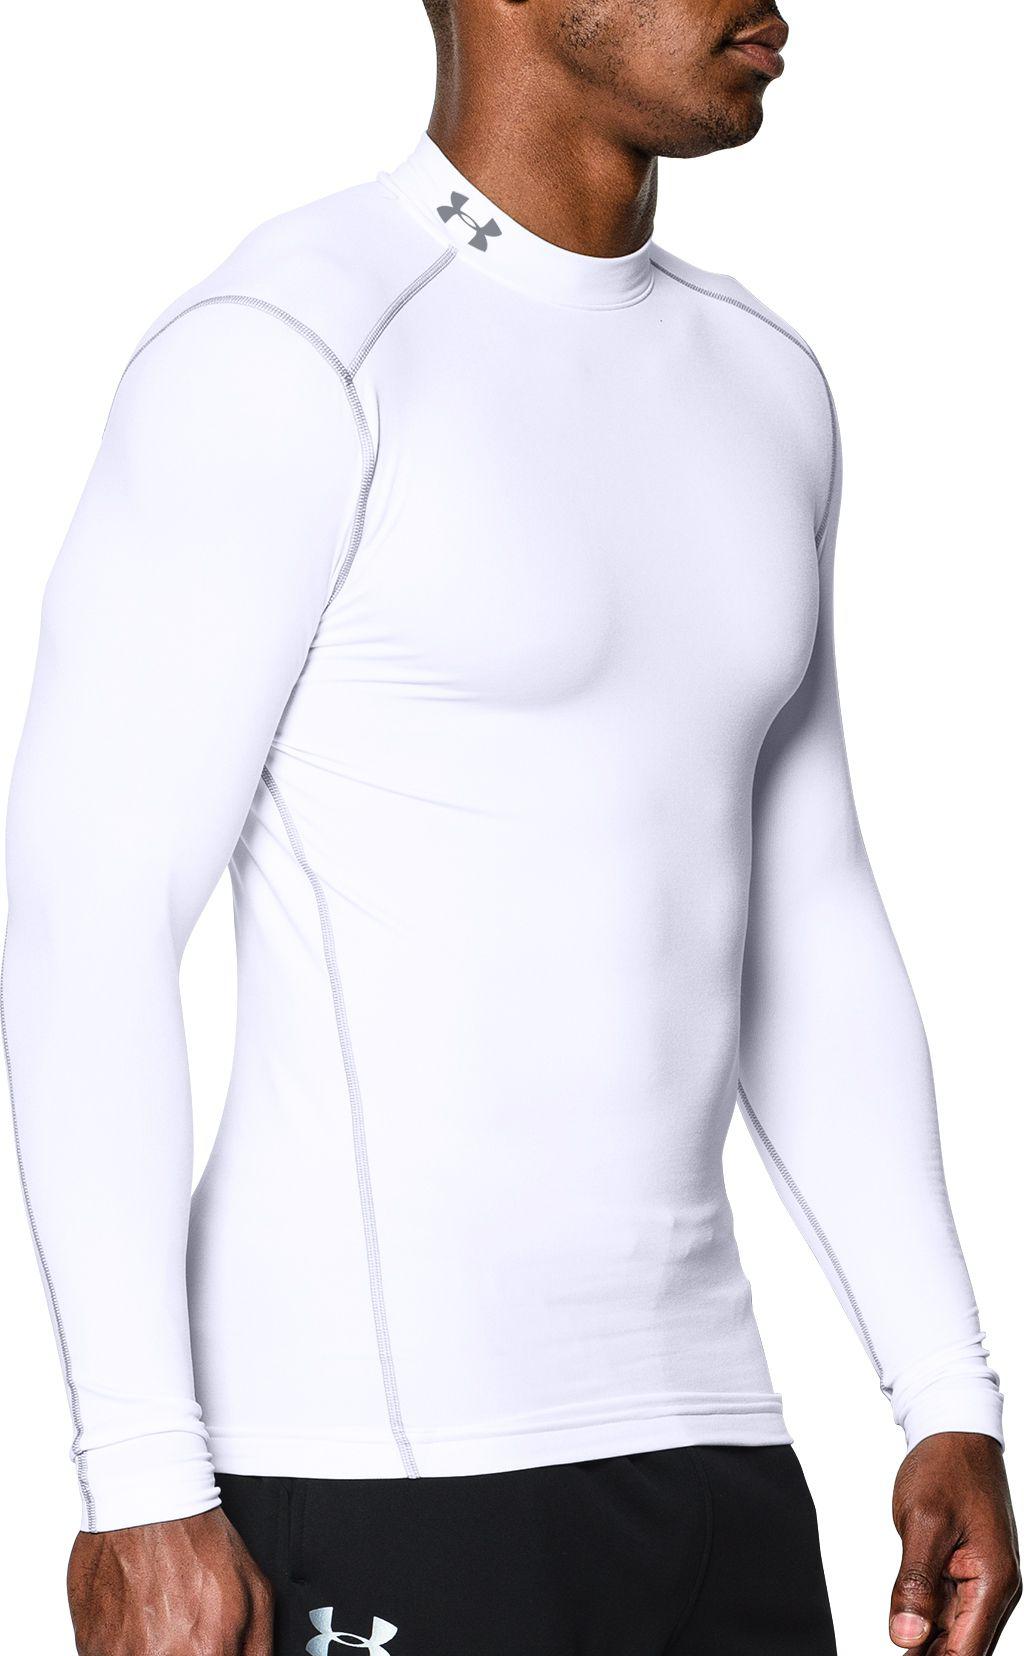 Download Under Armour Synthetic Coldgear Armour Compression Mock Neck Long Sleeve Shirt in White/Steel ...